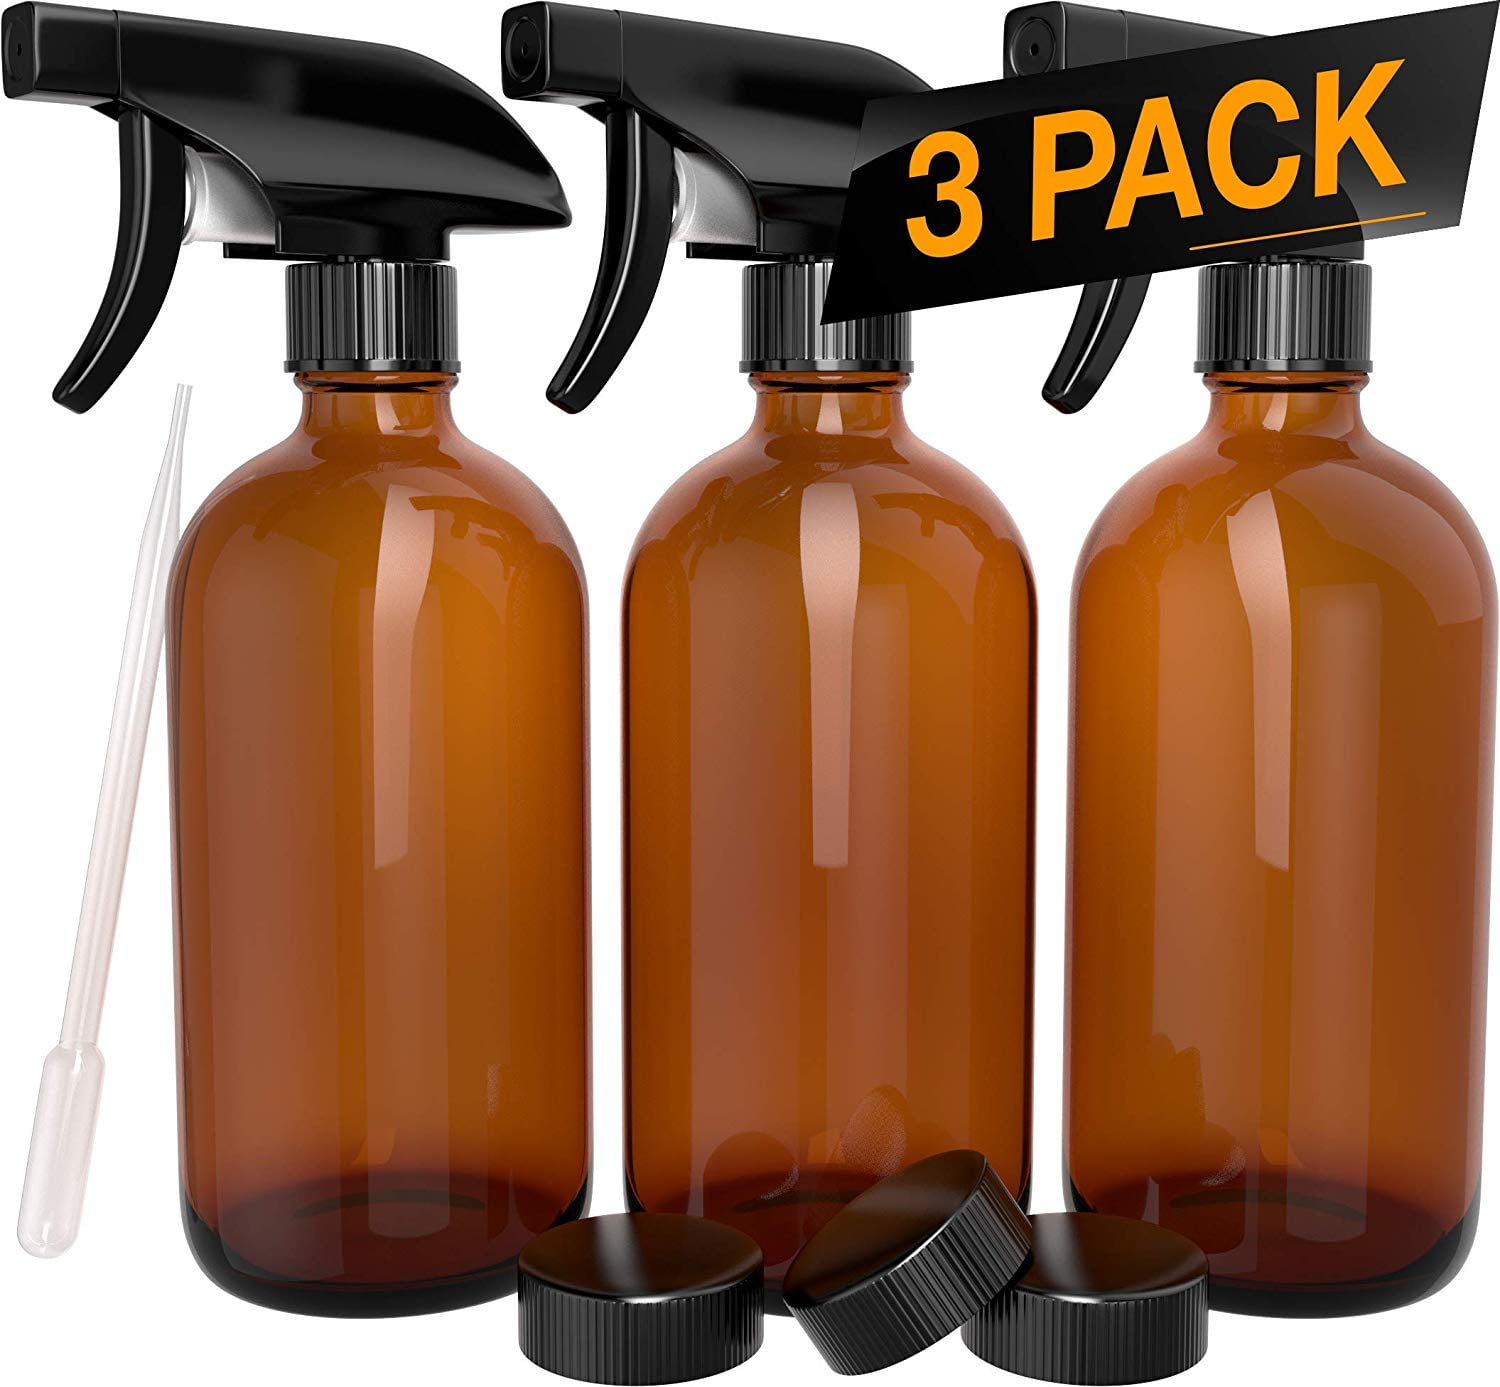 Nylea 3 Pack Refillable 16 oz Amber Glass Spray Bottles [Free Phenolic Cap  and Plastic Pipette] - Empty Container for Essential Oils, Cleaning  Products - Trigger Sprayer with Mist and Single Mode 